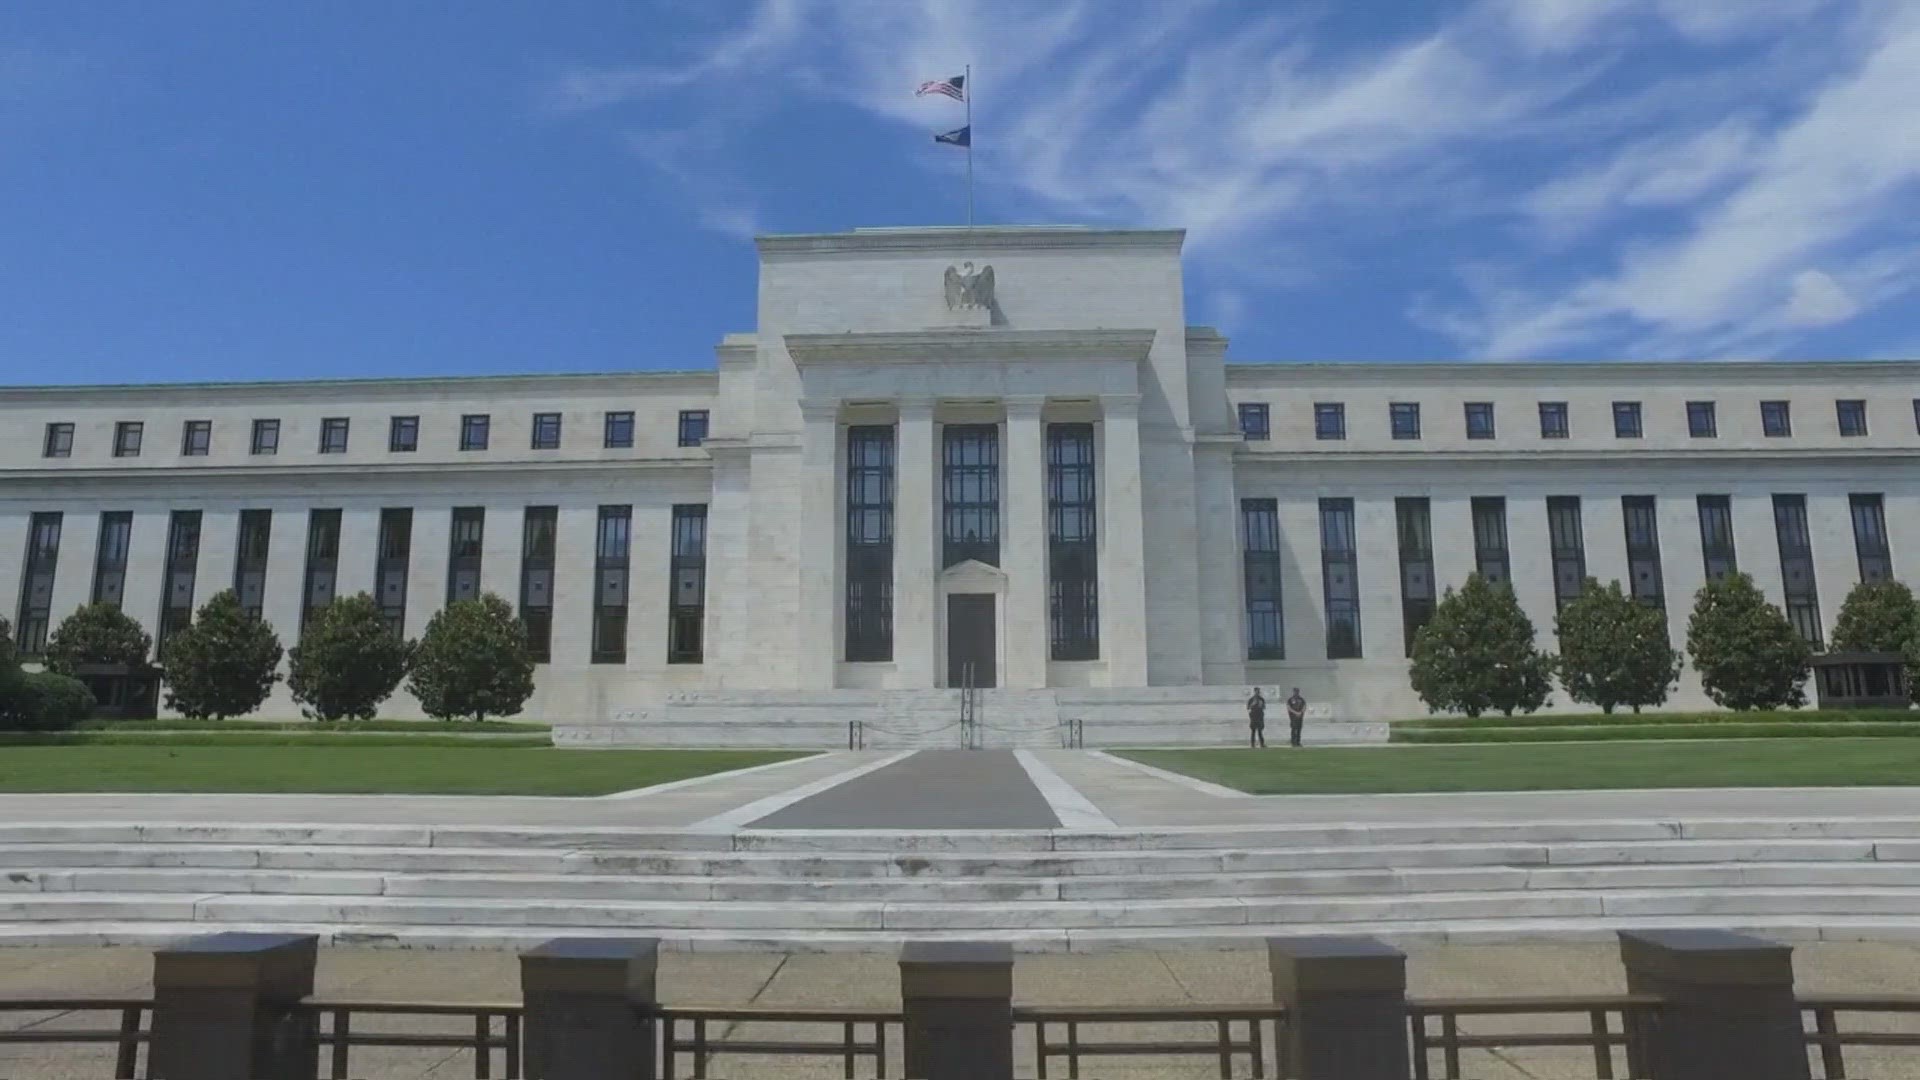 The Feds have also shown signs of potential cuts in interest rates.